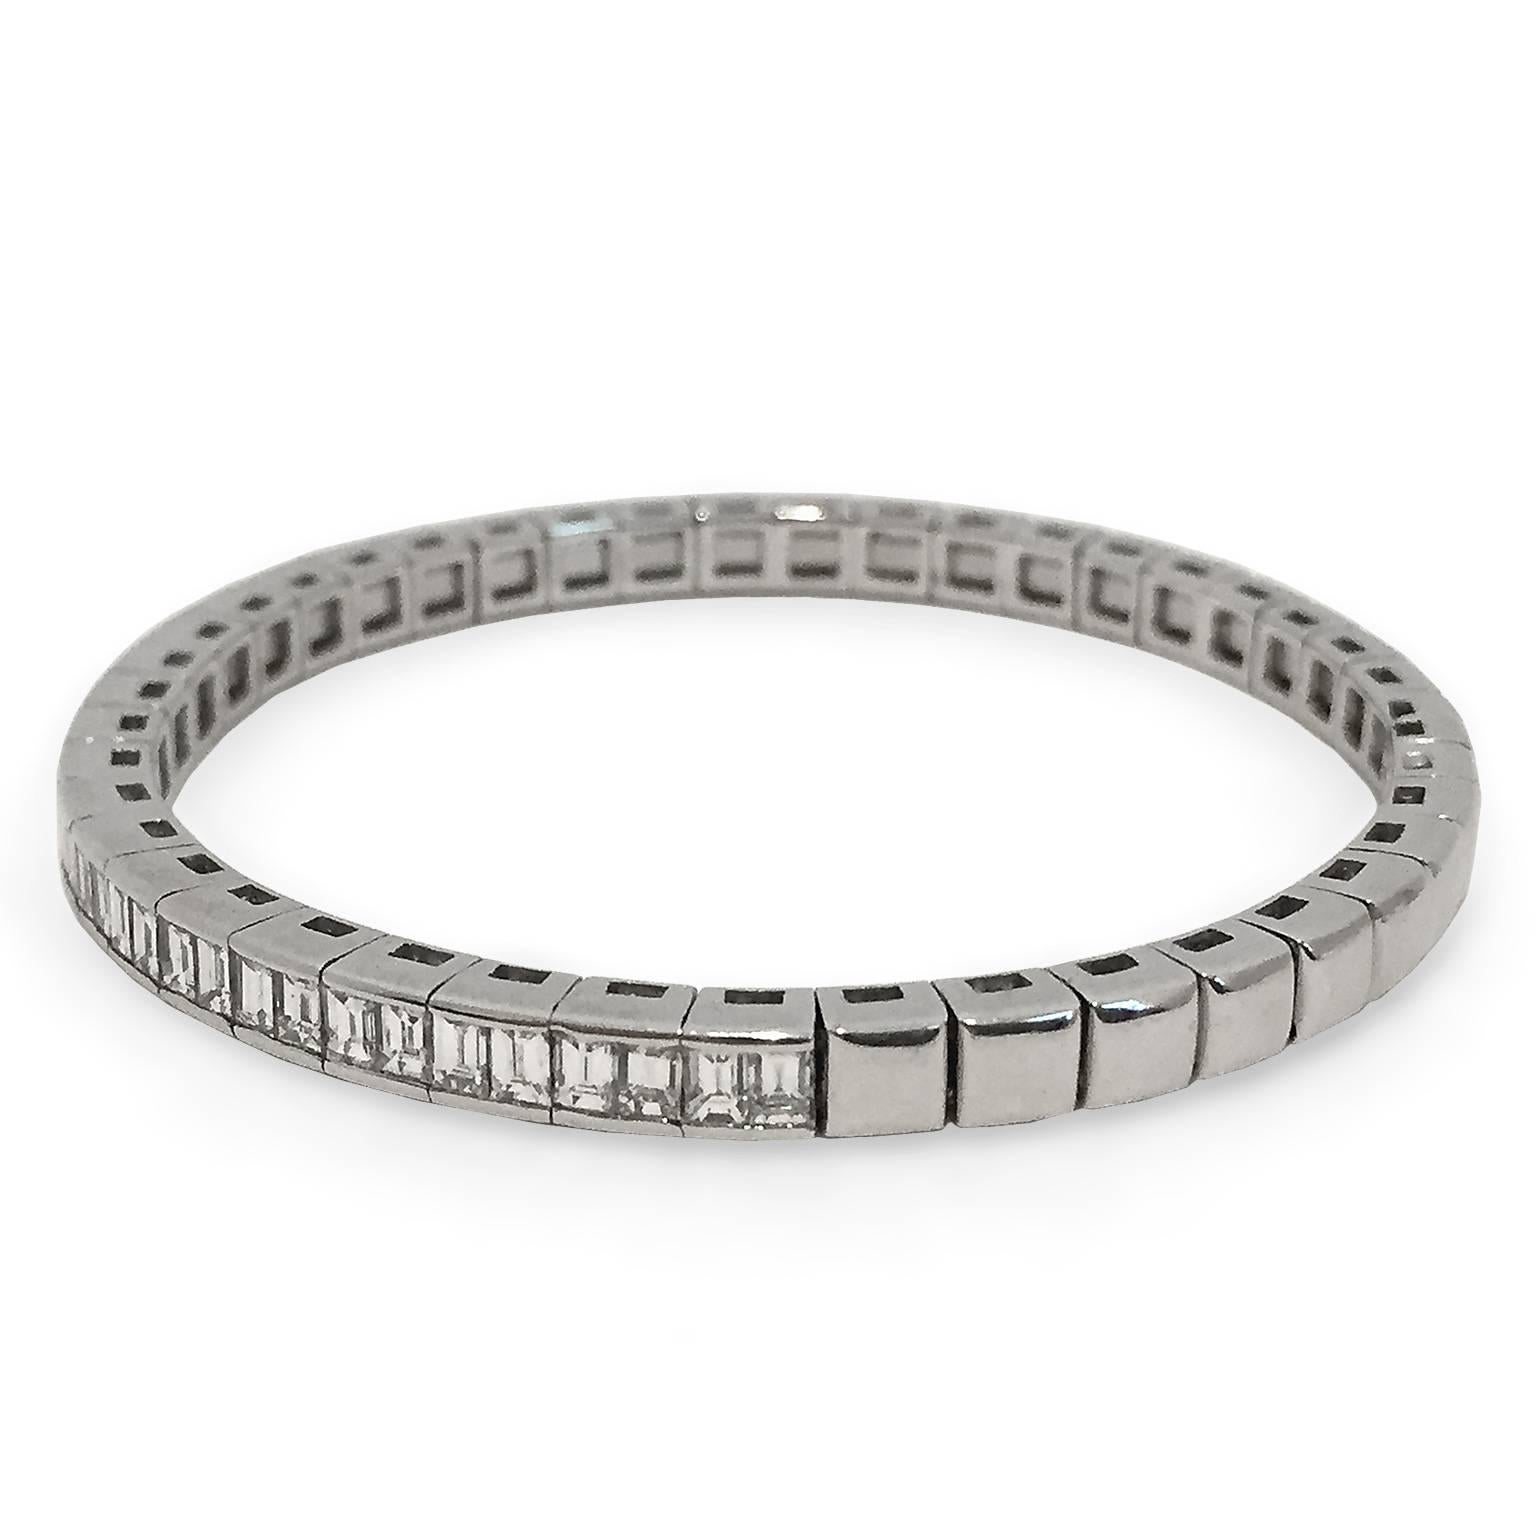 A distinctive modern design showcases approximately 5.50 carats of F-G color VS-VS1 grade baguette-cut diamonds. Diamonds go almost 3/4 of the way around the 18k white gold setting. Easy opening clasp, fits most wrists.